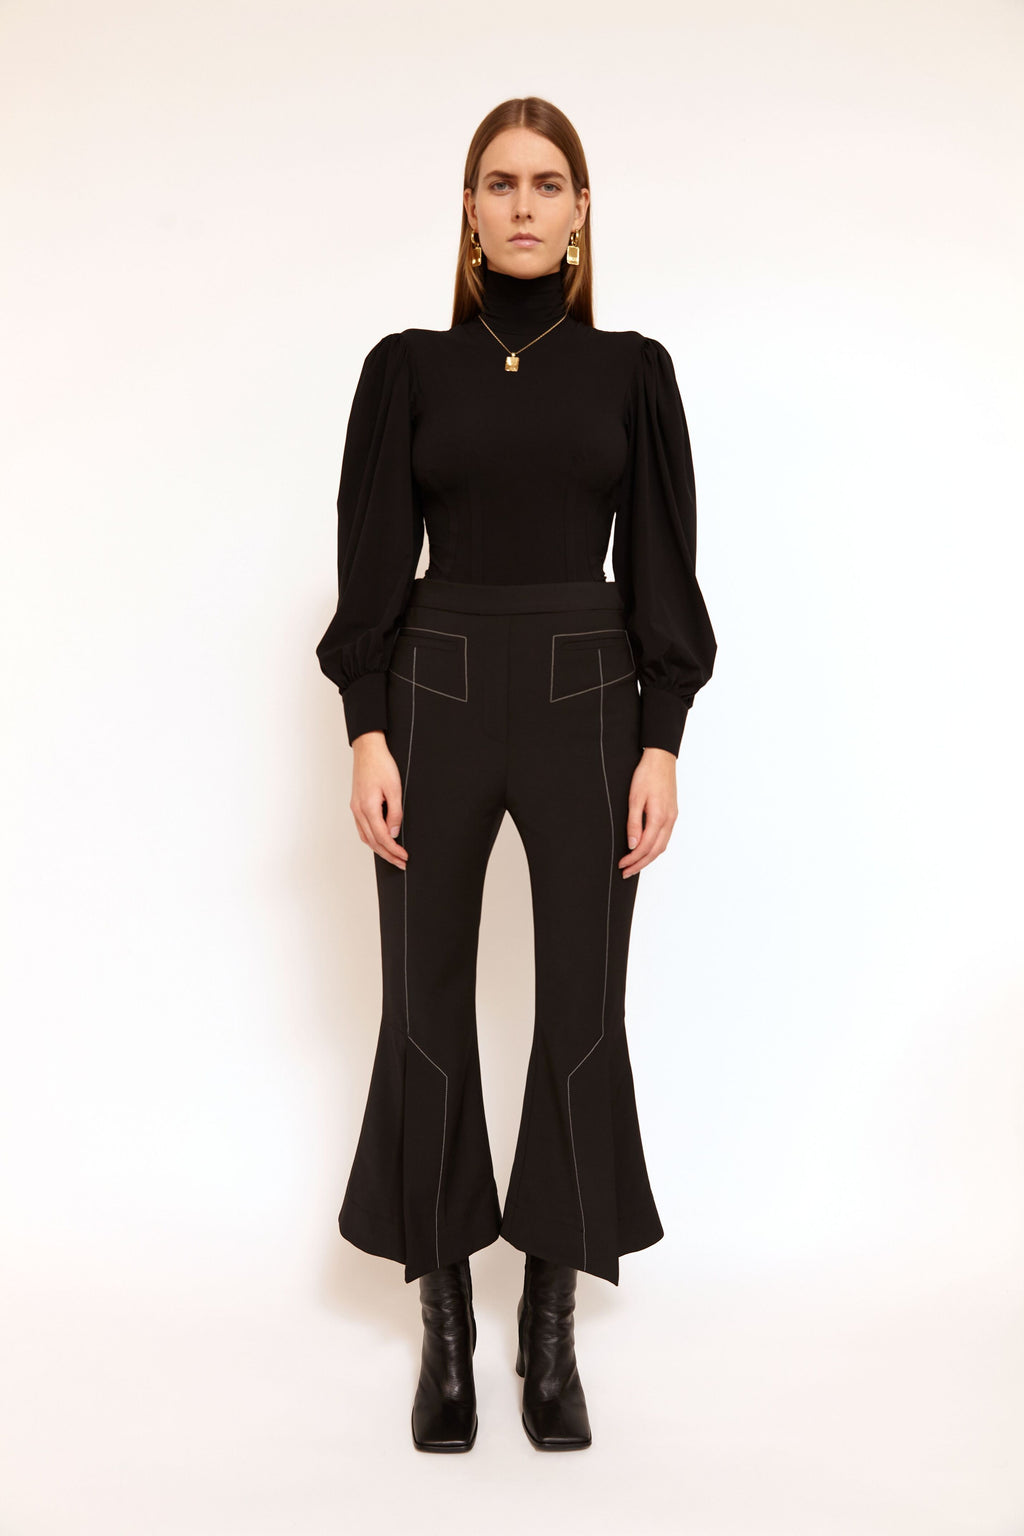 Sinuous Cropped Full Flare Pants by Ellery for Hire